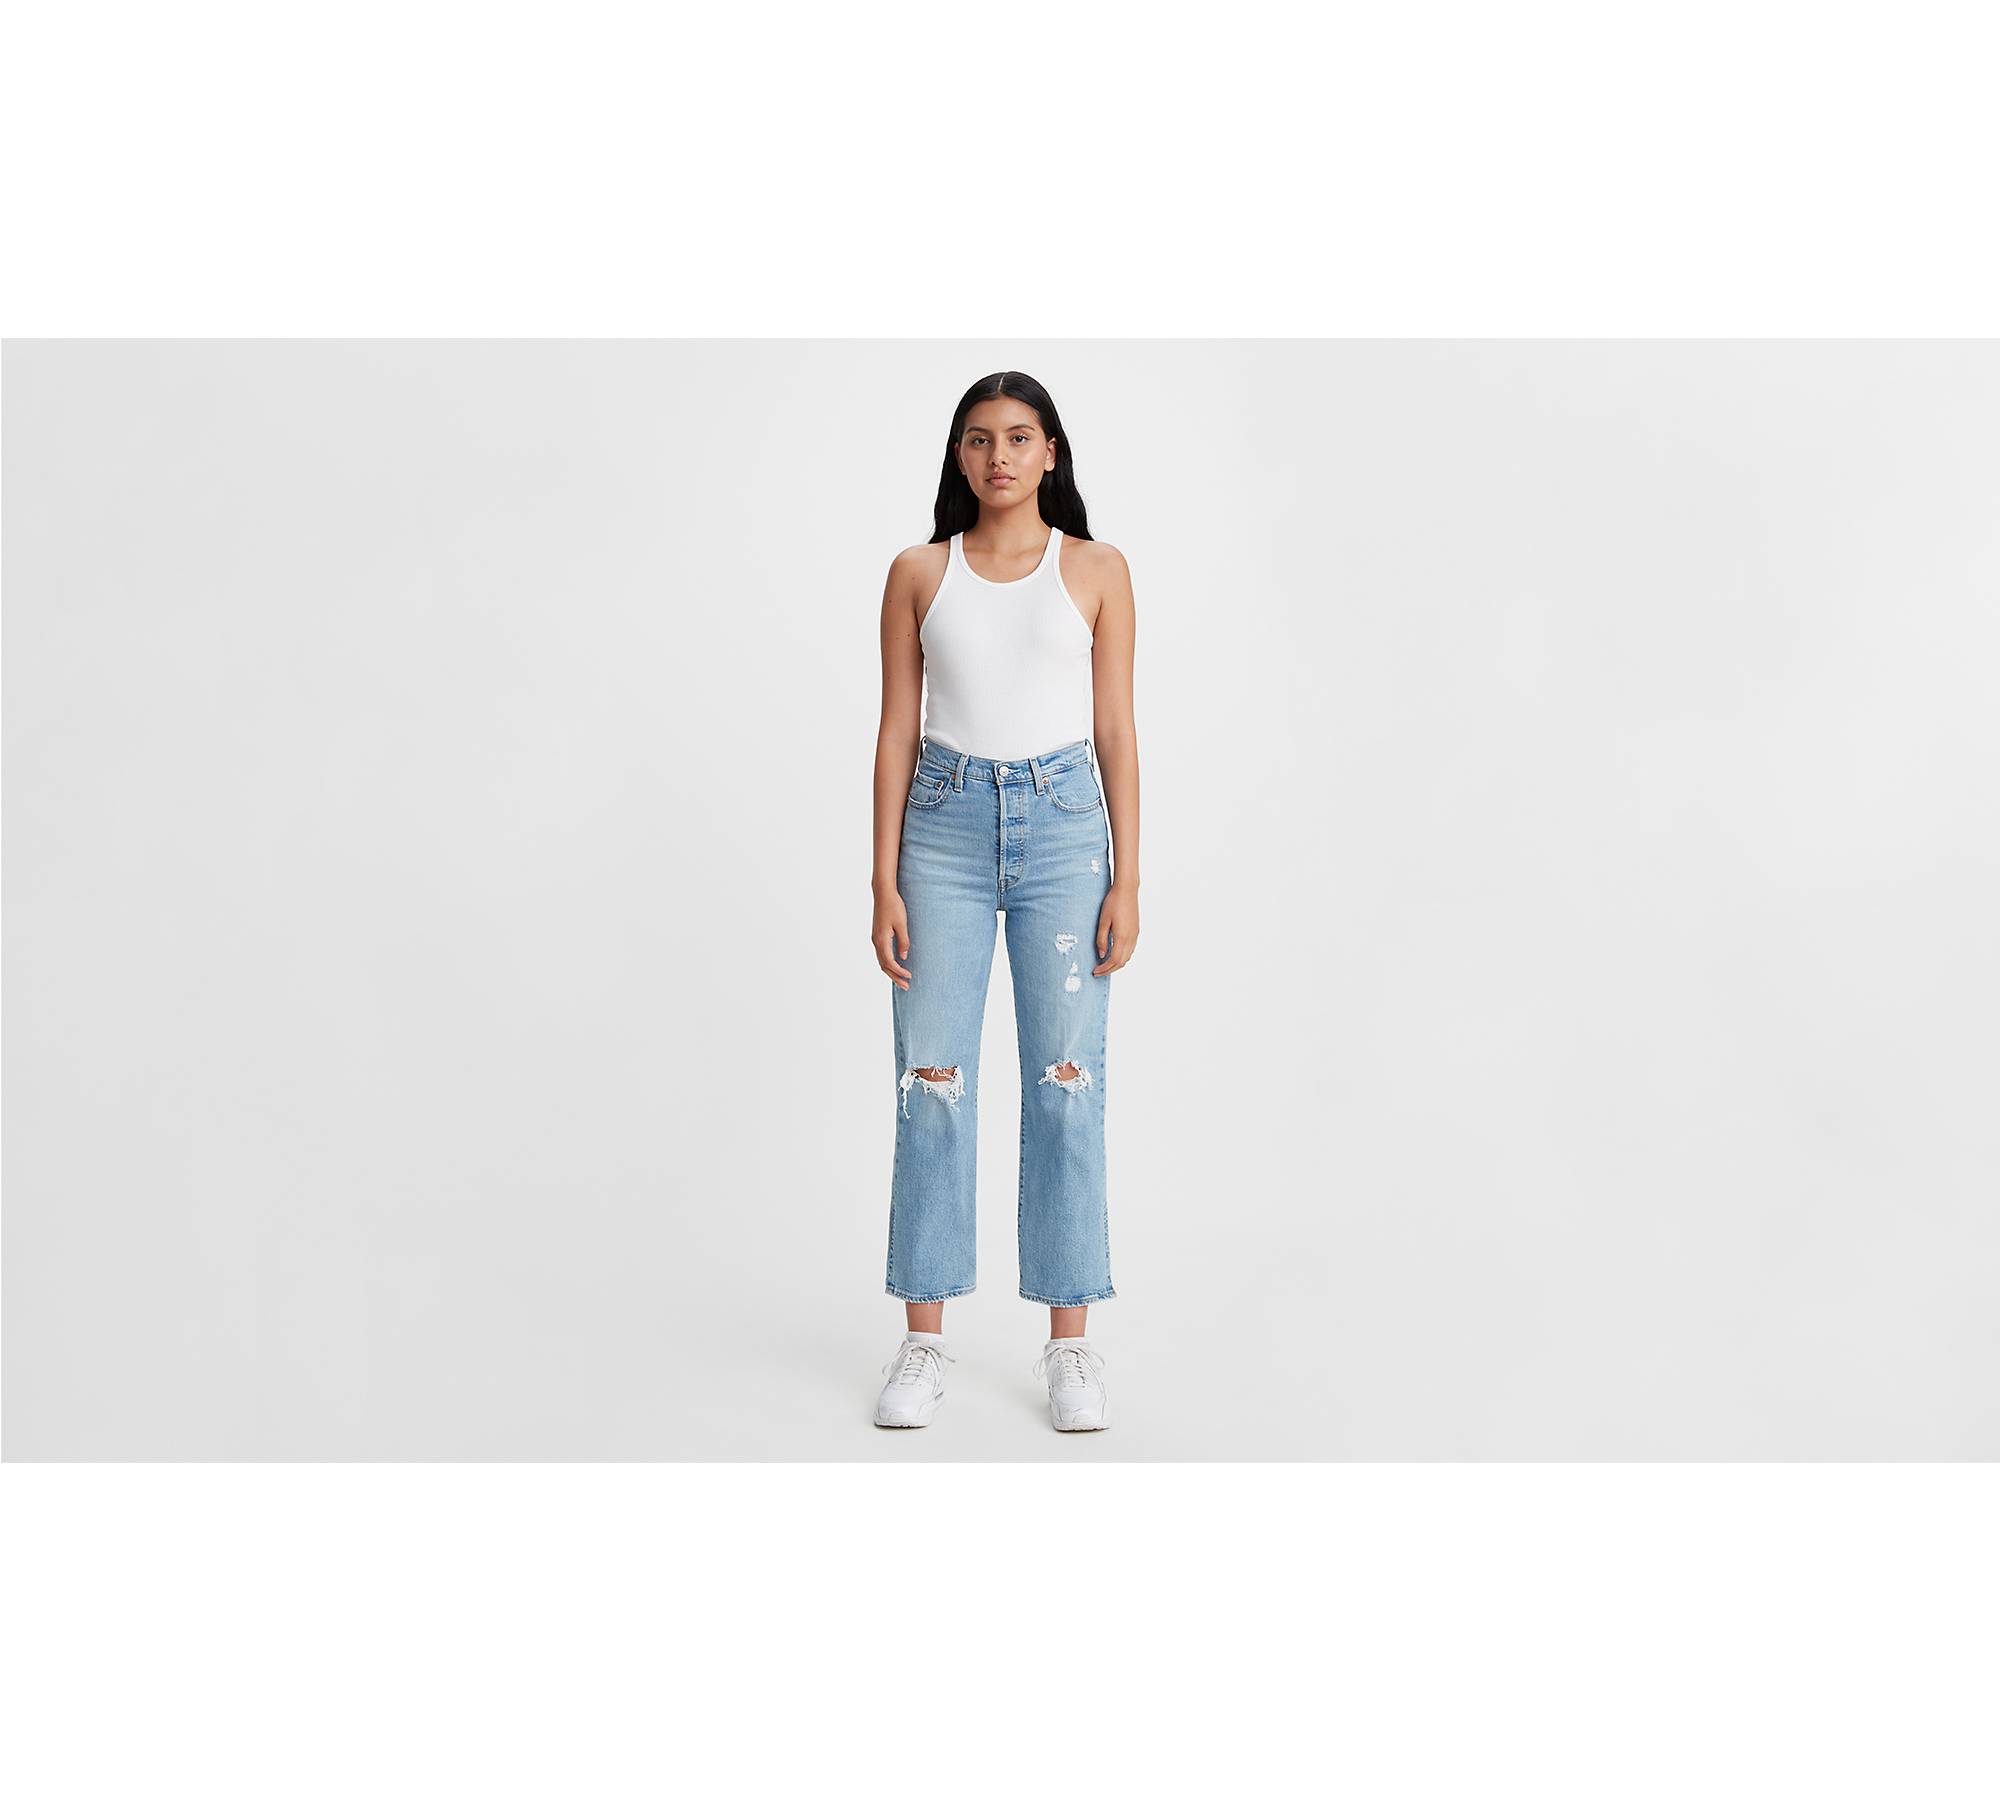 Ribcage Straight Ankle Women's Jeans - Medium Wash